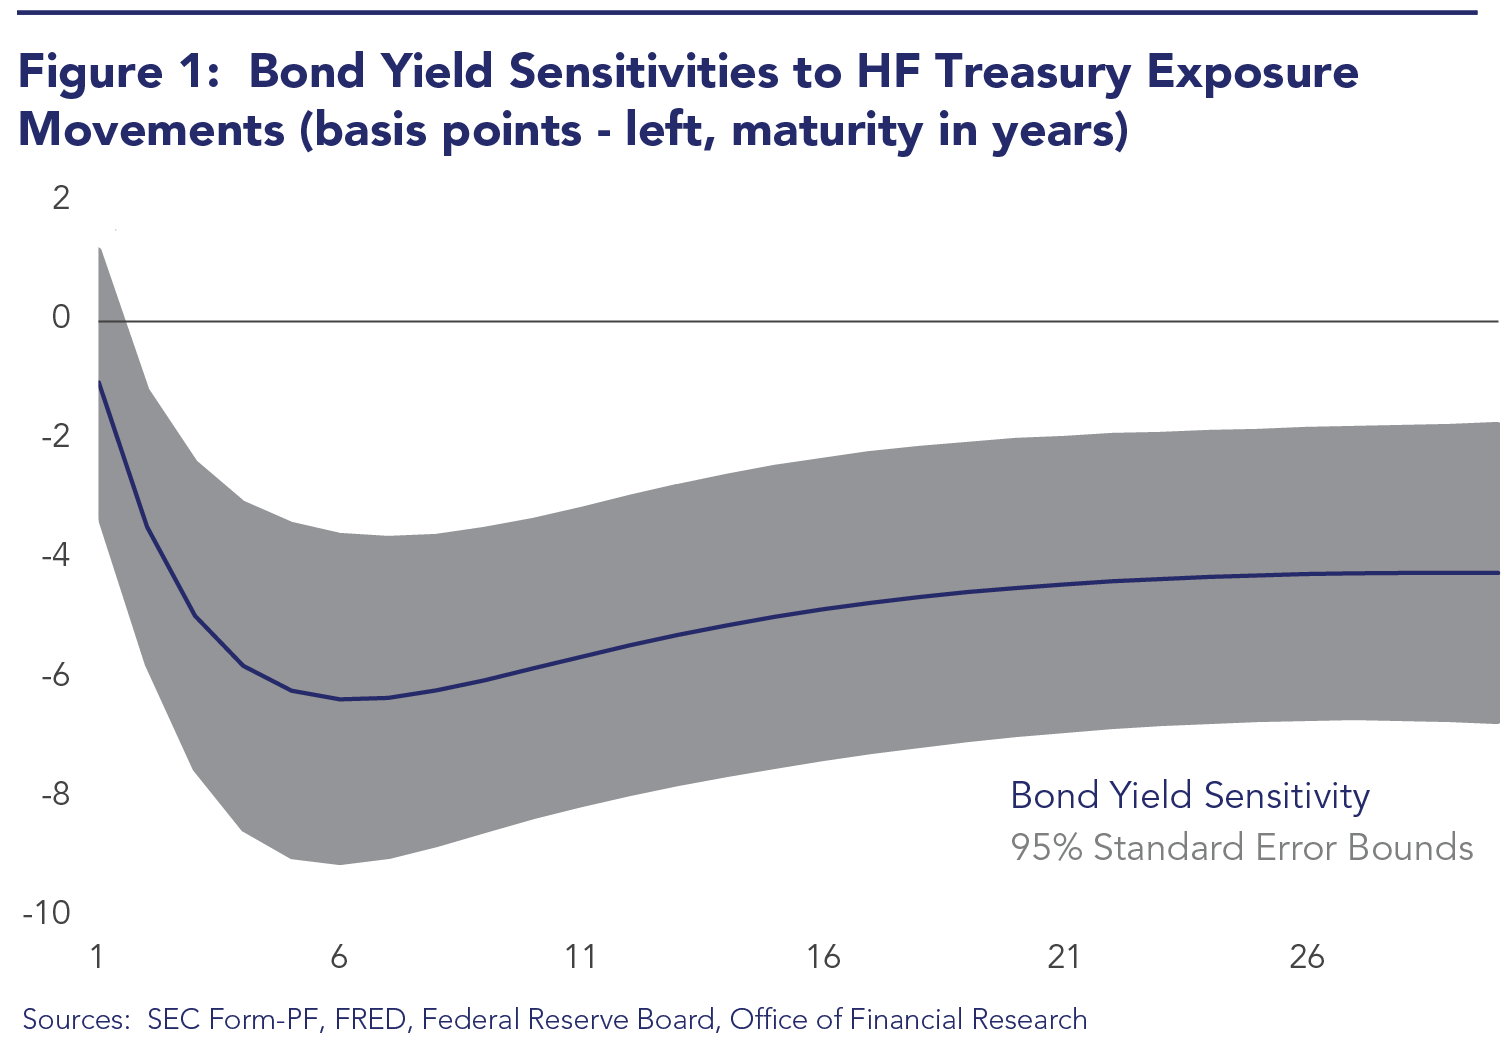 Figure 1 examines the sensitivities of bond yields to movements in net hedge fund exposures, across different maturities. The figure shows that the yield curve is significantly sensitive at medium and long horizons. Increases in hedge fund demand for U.S. Treasuries elevate prices and decrease bond yields.